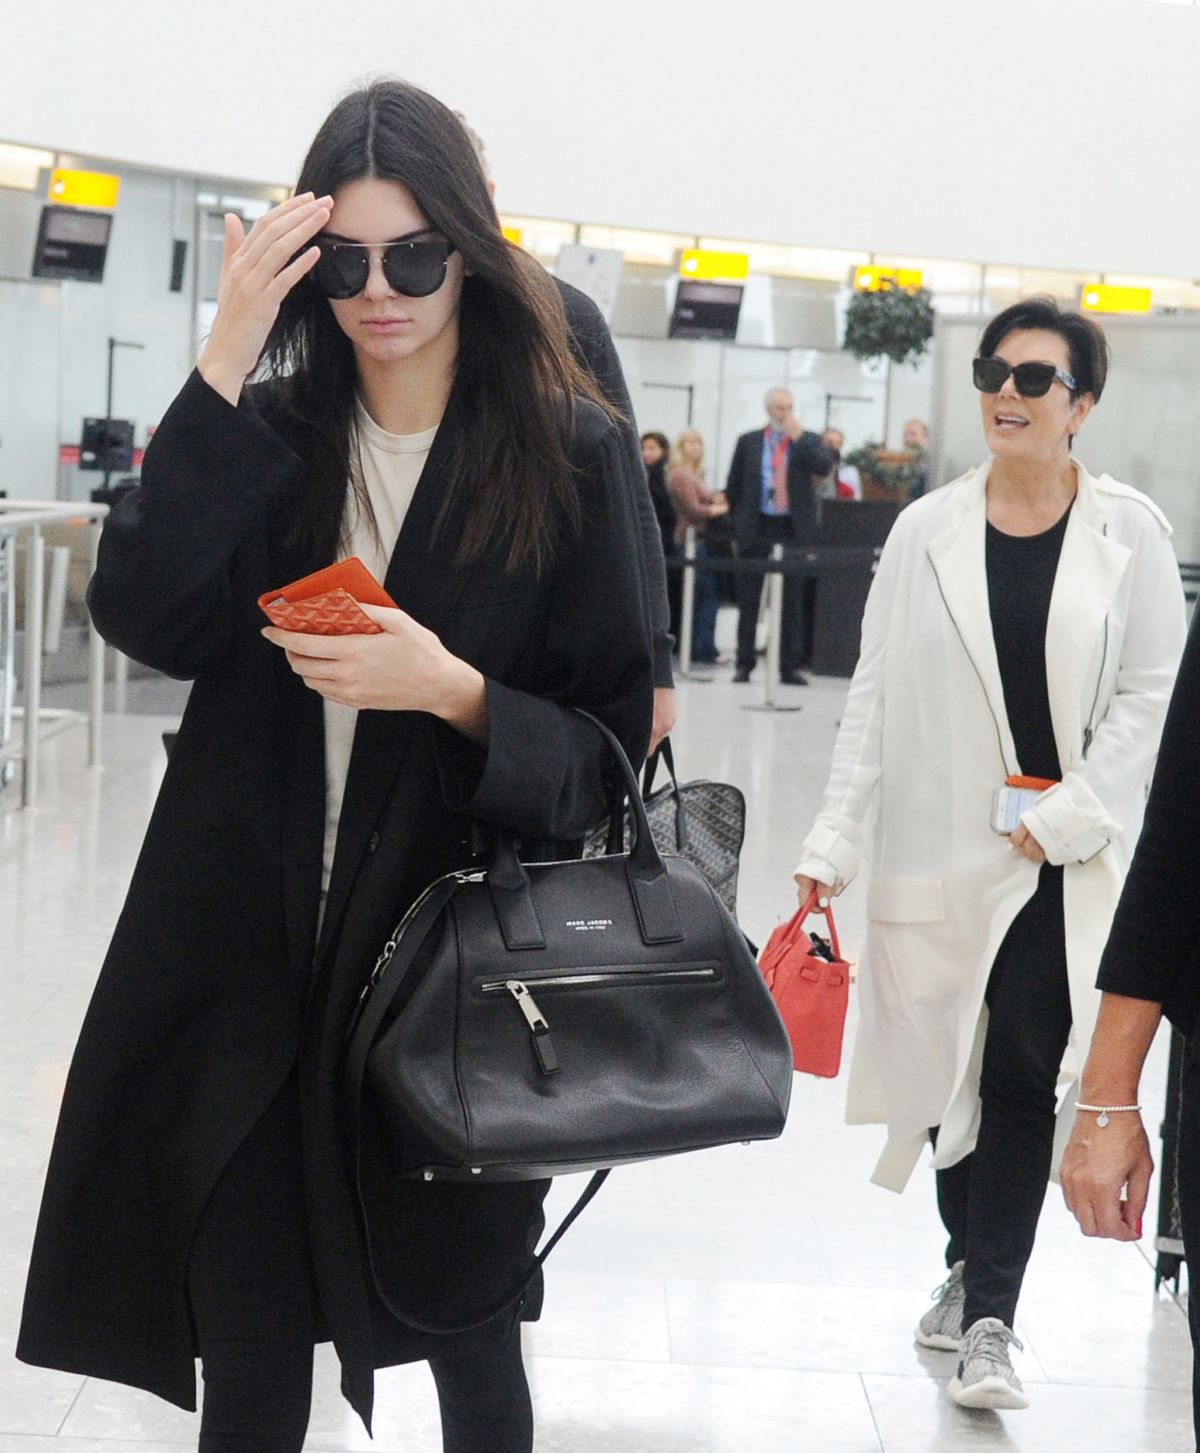 KENDALL JENNER at Heathrow Airport in London 07/14/2015 – HawtCelebs